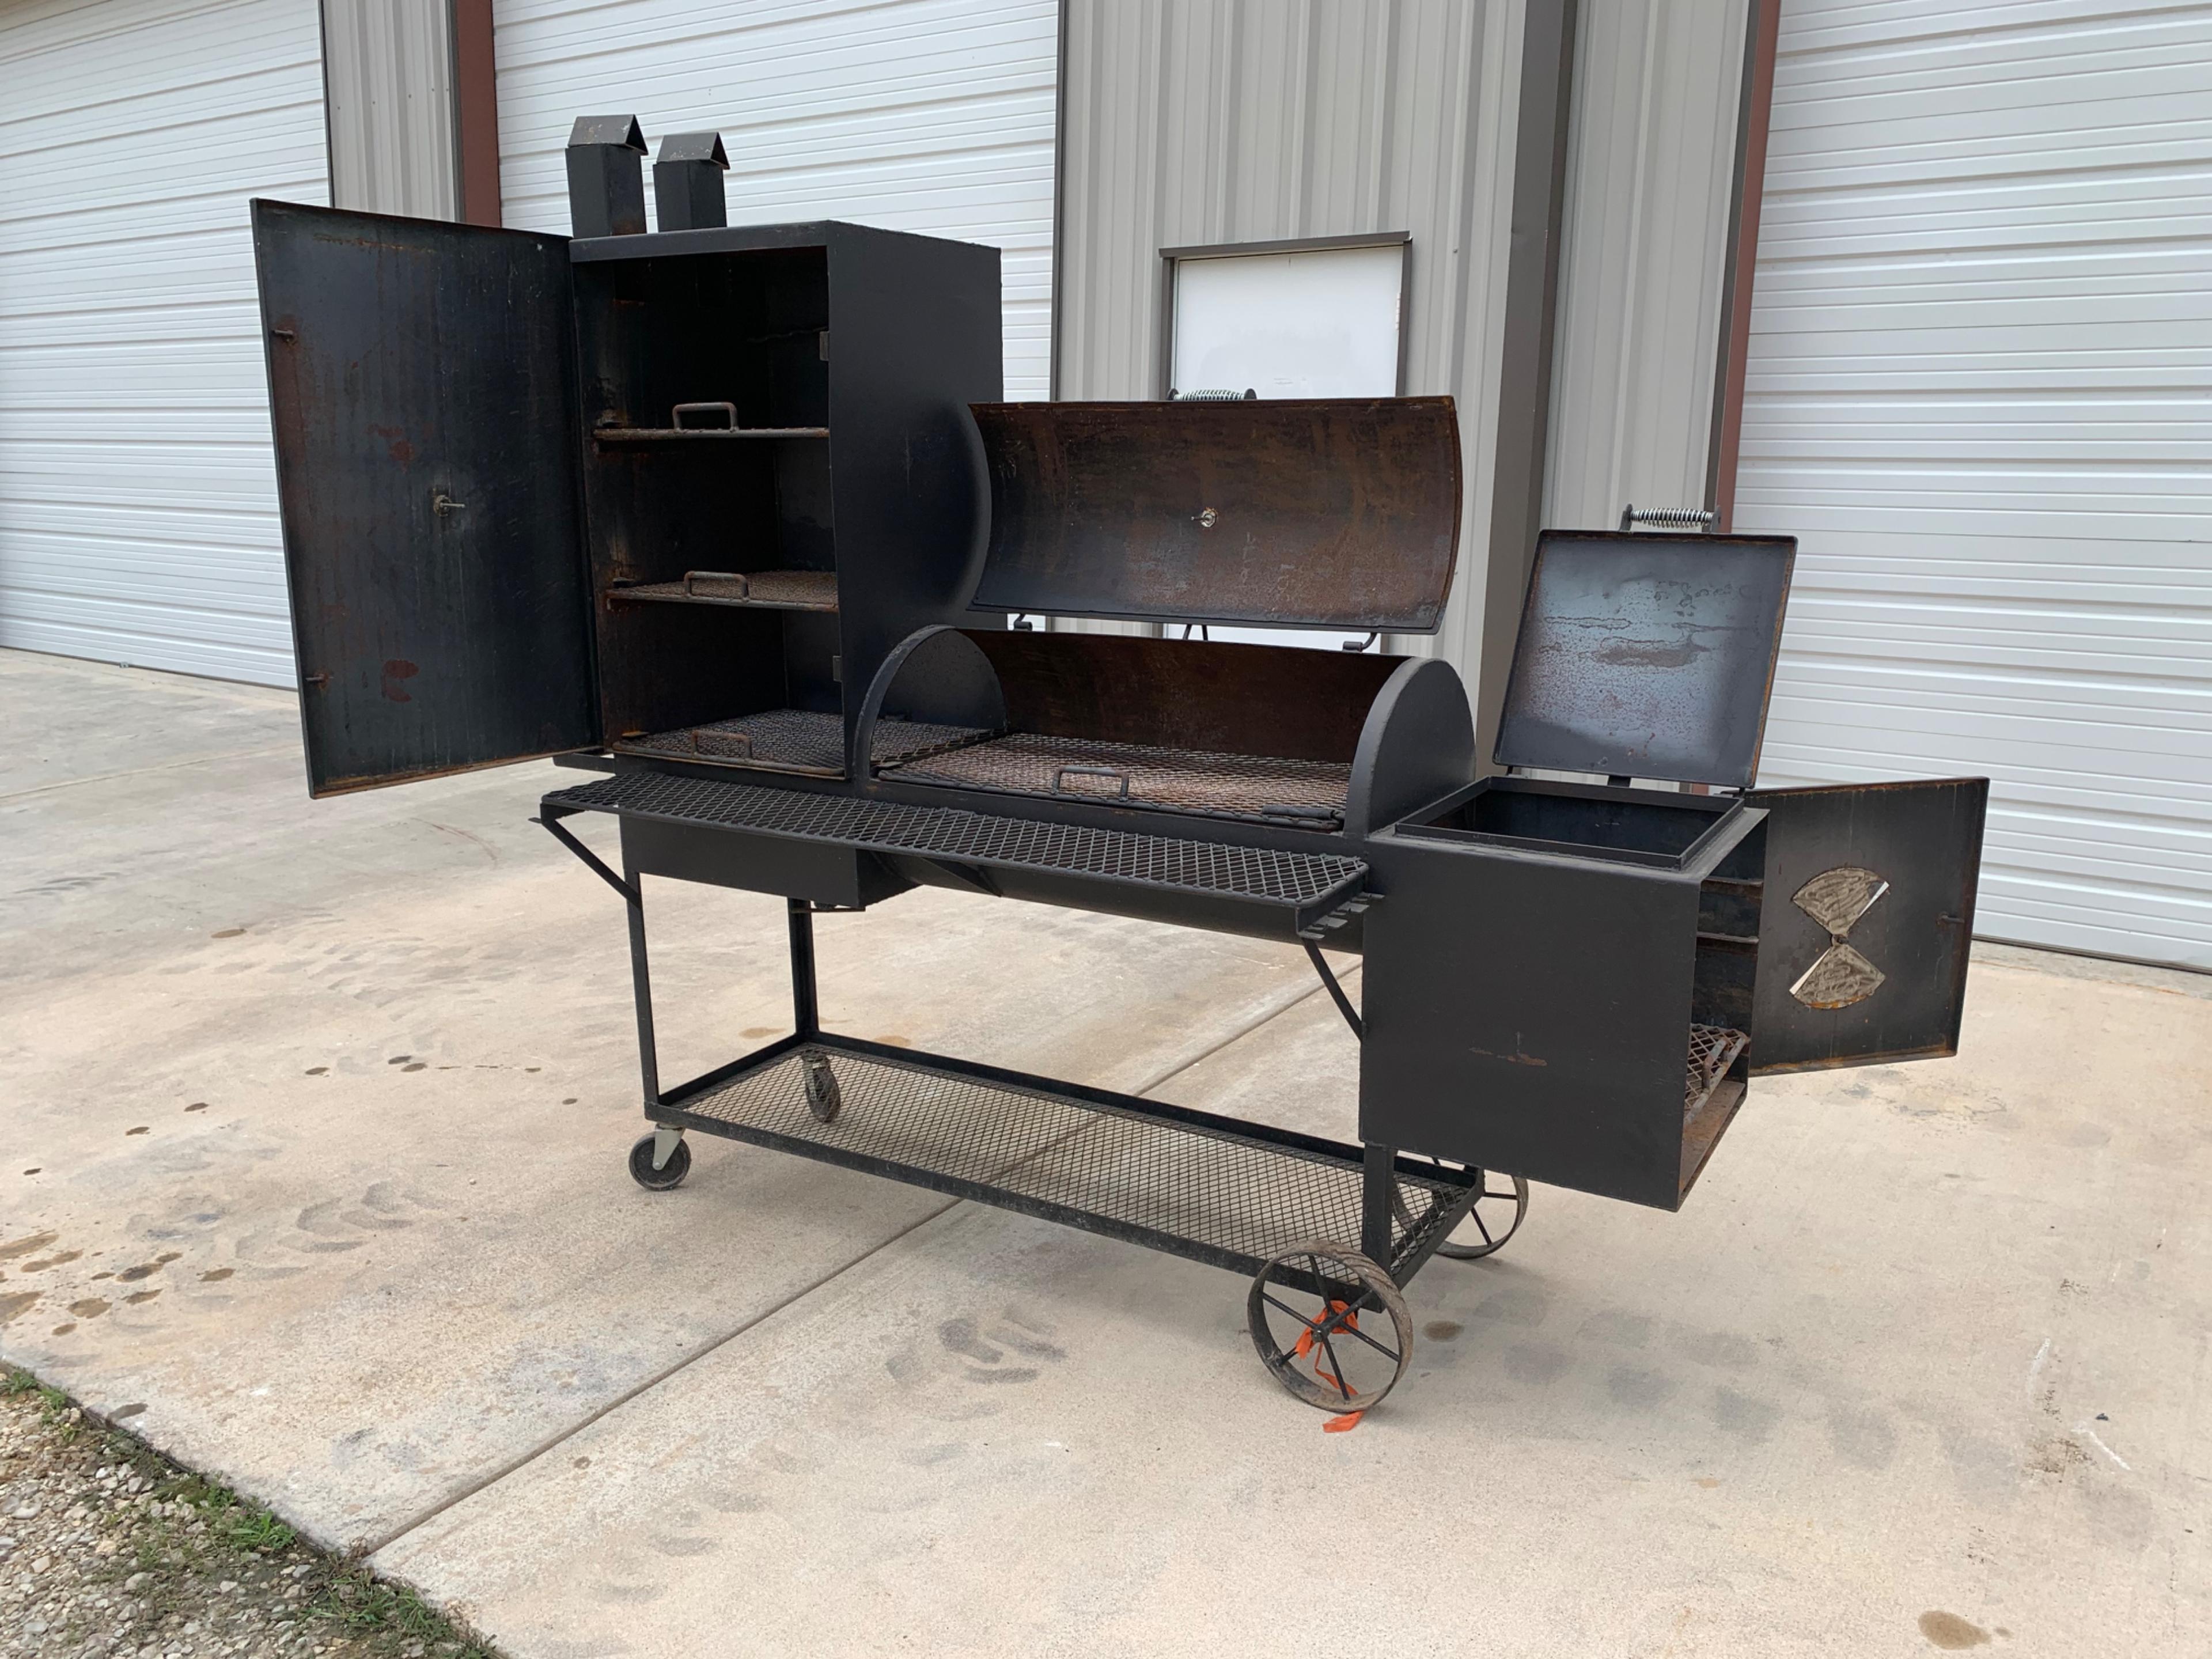 Homemade BBQ Pit W/ 2 Smoker Boxes